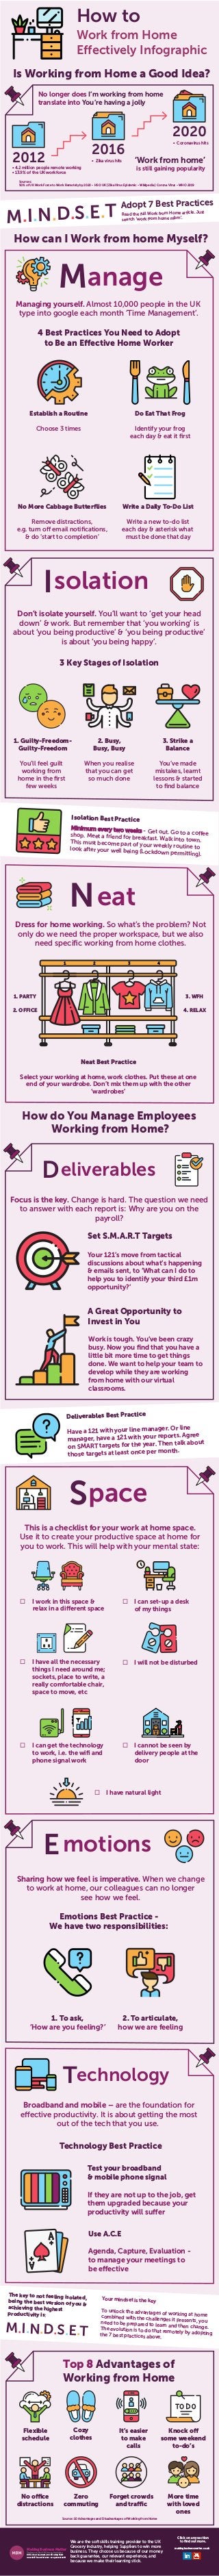 Adopt 7 Best Practices
Read the full Work from Home article. Just
search 'work from home mbm'.
M.I.N.D.S.E.T
How to
Work from Home
Effectively Infographic
Is Working from Home a Good Idea?
No longer does I’m working from home
translate into You’re having a jolly
2012
2016
• Zika virus hits ‘Work from home’
2020
• Coronavirus hits
• 4.2 million people remote working is still gaining popularity
• 13.9% of the UK workforce
Sources:
50% of UK Work Force to Work Remotely by 2020 - HSO UK | Zika Virus Epidemic - WIkipedia | Corona Virus - WHO 2019
How can I Work from home Myself?
Manage
Managing yourself. Almost 10,000 people in the UK
type into google each month ‘Time Management’.
4 Best Practices You Need to Adopt
to Be an Eective Home Worker
Establish a Routine
Choose 3 times
Do Eat That Frog
Identify your frog
each day  eat it frst
No More Cabbage Butterfies
Remove distractions,
e.g. turn o‡ email notifcations,
 do ‘start to completion’
Write a Daily To-Do List
Write a new to-do list
each day  asterisk what
must be done that day
Isolation
Don’t isolate yourself. You’ll want to ‘get your head
down’  work. But remember that ‘you working’ is
about ‘you being productive’  ‘you being productive’
is about ‘you being happy’.
3 Key Stages of Isolation
1. Guilty-Freedom-
Guilty-Freedom
You’ll feel guilt
working from
home in the frst
few weeks
2. Busy,
Busy, Busy
When you realise
that you can get
so much done
3. Strike a
Balance
You’ve made
mistakes, learnt
lessons  started
to fnd balance
Isolation Best Practice
Minimum every two weeks - Get out. Go to a coffeeshop. Meet a friend for breakfast. Walk into town.This must become part of your weekly routine tolook after your well being (Lockdown permitting).
Neat
Dress for home working. So what’s the problem? Not
only do we need the proper workspace, but we also
need specifc working from home clothes.
1 2 3 4
1. PARTY
2. OFFICE
3. WFH
4. RELAX
Neat Best Practice
Select your working at home, work clothes. Put these at one
end of your wardrobe. Don’t mix them up with the other
‘wardrobes’
Deliverables
How do You Manage Employees
Working from Home?
Focus is the key. Change is hard. The question we need
to answer with each report is: Why are you on the
payroll?
Set S.M.A.R.T Targets
Your 121’s move from tactical
discussions about what’s happening
 emails sent, to ‘What can I do to
help you to identify your third £1m
opportunity?’
A Great Opportunity to
Invest in You
Work is tough. You’ve been crazy
busy. Now you fnd that you have a
little bit more time to get things
done. We want to help your team to
develop while they are working
from home with our virtual
classrooms.
Deliverables Best Practice
Have a 121 with your line manager. Or line
manager, have a 121 with your reports. Agree
on SMART targets for the year. Then talk about
those targets at least once per month.
Space
This is a checklist for your work at home space.
Use it to create your productive space at home for
you to work. This will help with your mental state:


 

I work in this space 
relax in a different space
I can set-up a desk
of my things
I have all the necessary
things I need around me;
sockets, place to write, a
really comfortable chair,
space to move, etc
I can get the technology
to work, i.e. the wif and
phone signal work
I cannot be seen by
delivery people at the
door
I will not be disturbed
I have natural light
Emotions
Sharing how we feel is imperative. When we change
to work at home, our colleagues can no longer
see how we feel.
Emotions Best Practice -
We have two responsibilities:
1. To ask,
‘How are you feeling?’
2. To articulate,
how we are feeling
Technology
Broadband and mobile – are the foundation for
e‡ective productivity. It is about getting the most
out of the tech that you use.
Technology Best Practice
Test your broadband
 mobile phone signal
If they are not up to the job, get
them upgraded because your
productivity will suer
Use A.C.E
Agenda, Capture, Evaluation -
to manage your meetings to
be eective
The key to not feeling isolated,
being the best version of you 
achieving the highest
productivity is:
M.I.N.D.S.E.T
Your mindset is the key
To unlock the advantages of working at homecombined with the challenges it presents, youneed to be prepared to learn and then change.The evolution is to do that remotely by adoptingthe 7 best practices above.
Top 8 Advantages of
Working from Home
Flexible
schedule
Cozy
clothes
It’s easier
to make
calls
Knock o
some weekend
to-do’s
No oıce
distractions
Zero
commuting
Forget crowds
and traıc
More time
with loved
ones
Source: 10 Advantages and Disadvantages of Working from Home
Click on any section
to find out more.
makingbusinessmatter.co.uk
We are the soft skills training provider to the UK
Grocery Industry, helping Suppliers to win more
business. They choose us because of our money
back guarantee, our relevant experience, and
because we make their learning stick.
Making Business Matter
Trainers to the UK Grocery Industry
80% of our Learners are still using their
new skill 5 months later - we guarantee it!


 